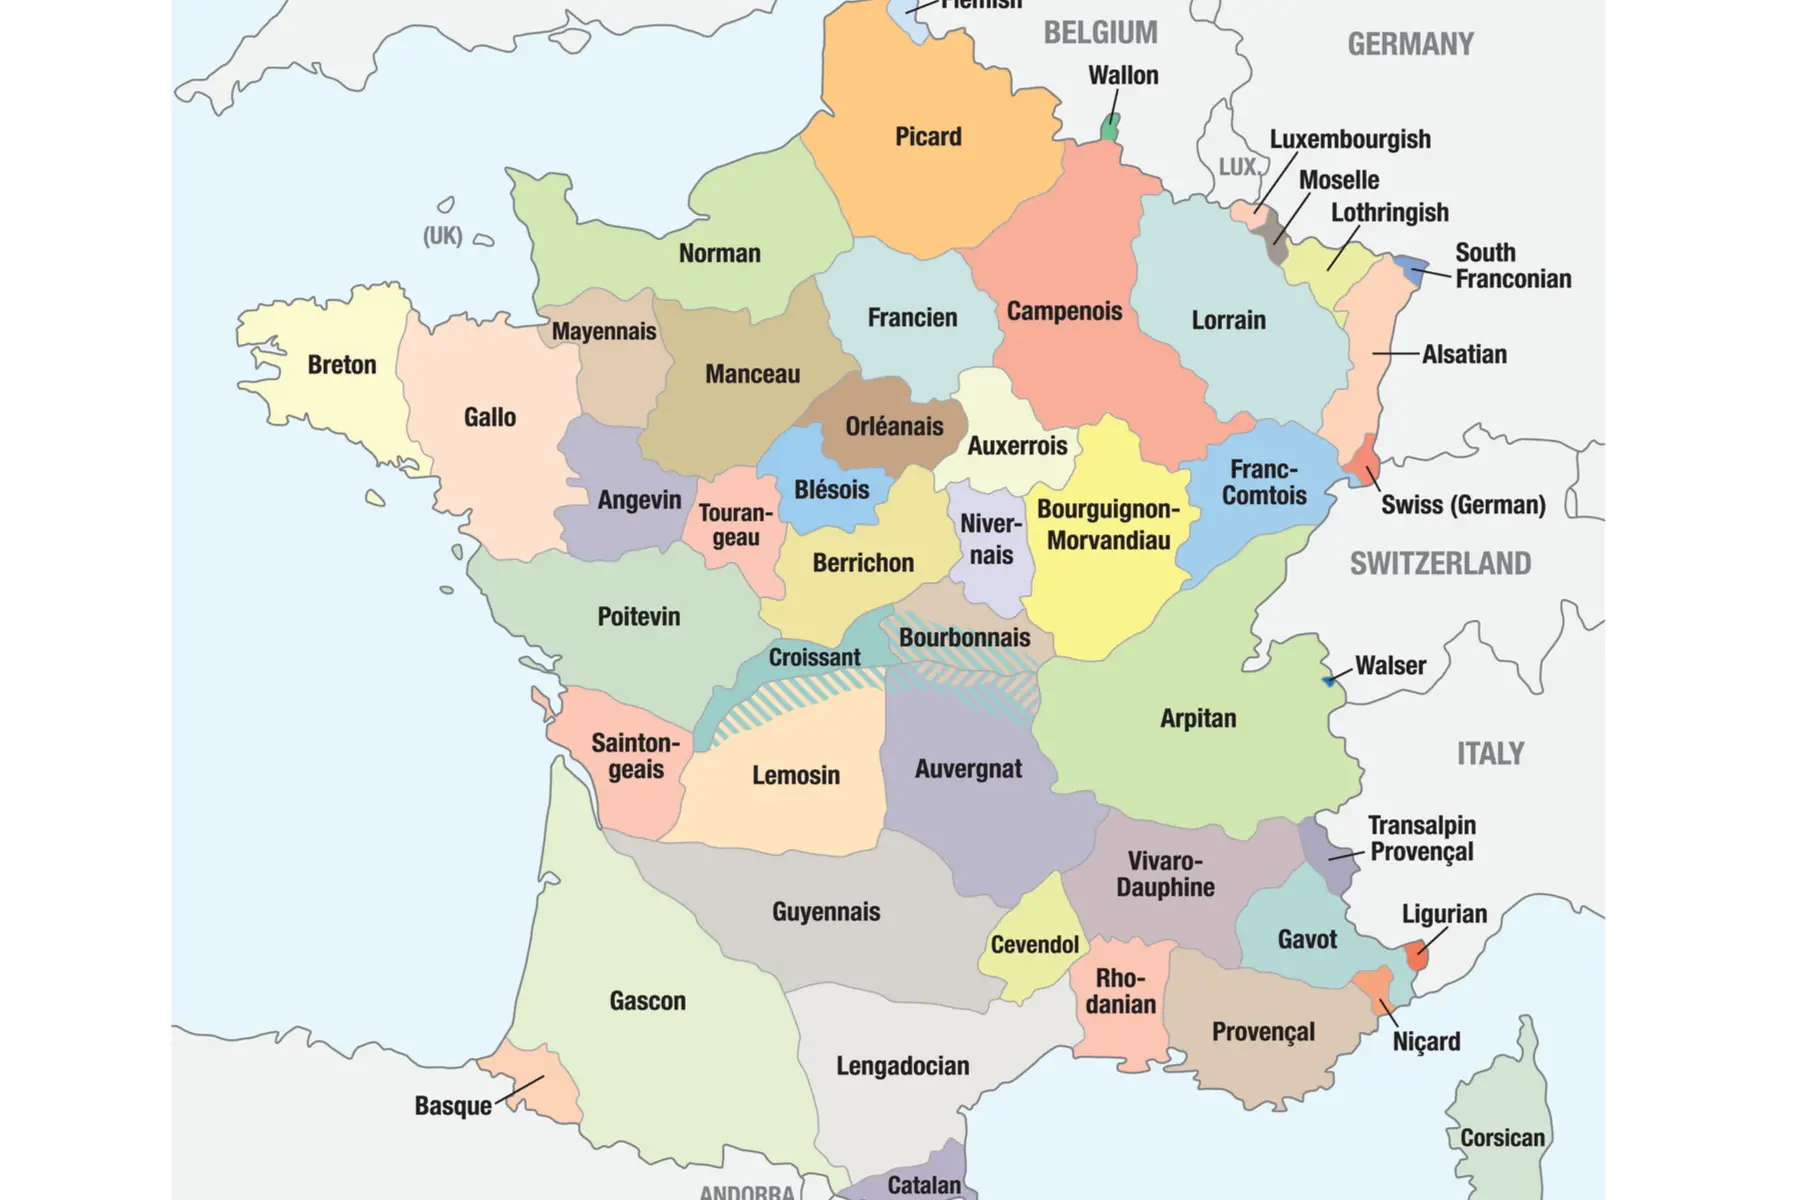 map of main dialects and where they are spoken across France